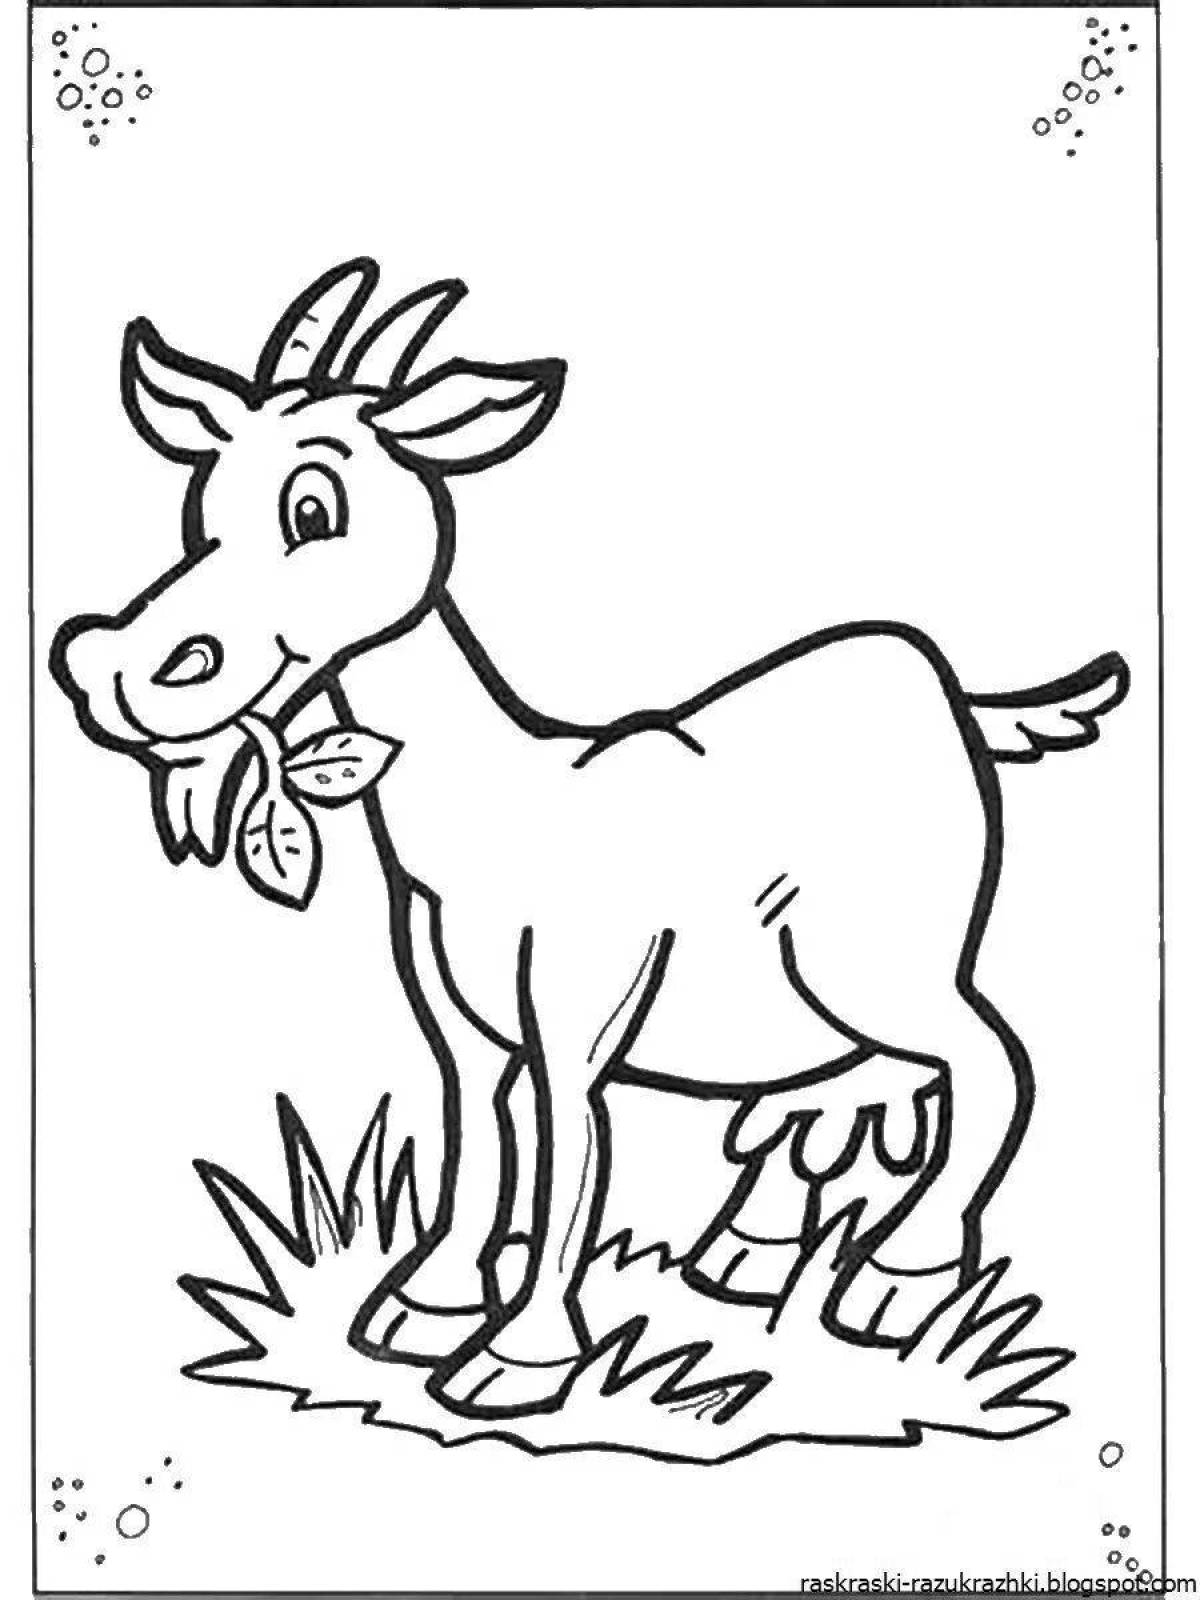 Adorable goat coloring book for children 5-6 years old